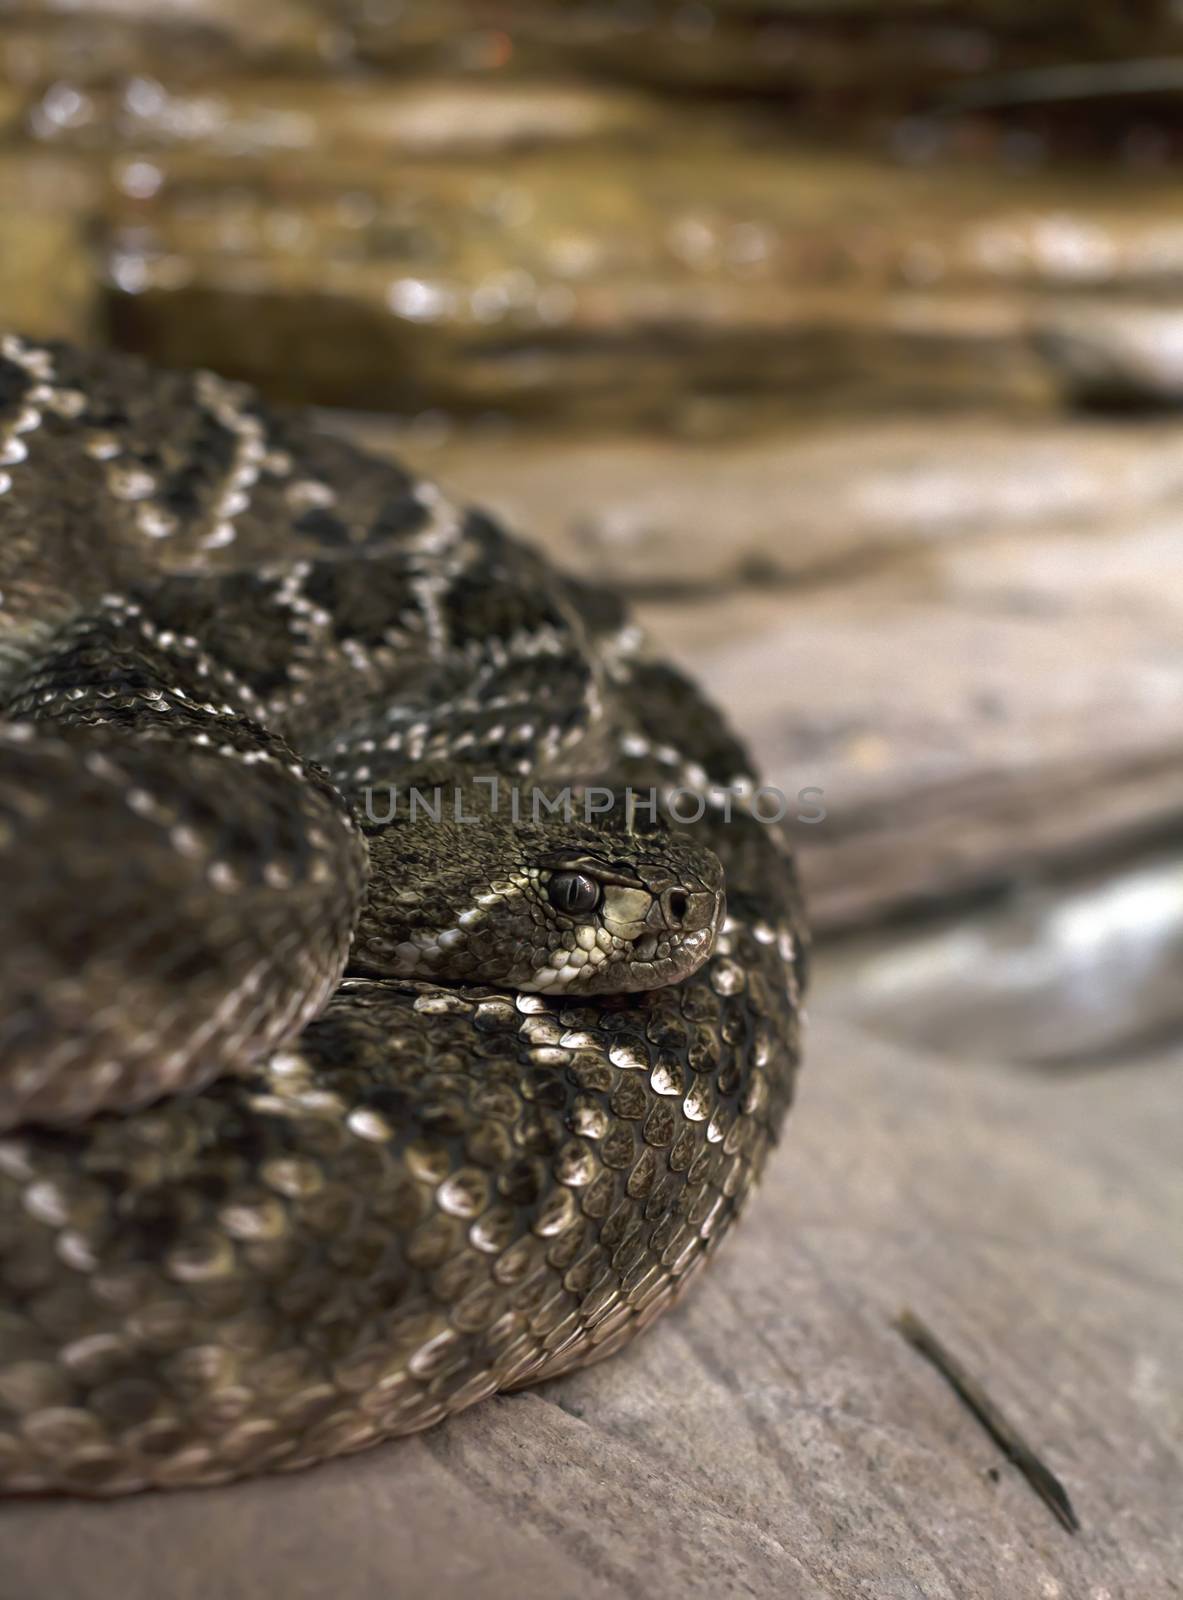 Close up of an Eastern diamondback rattlesnake in a coil